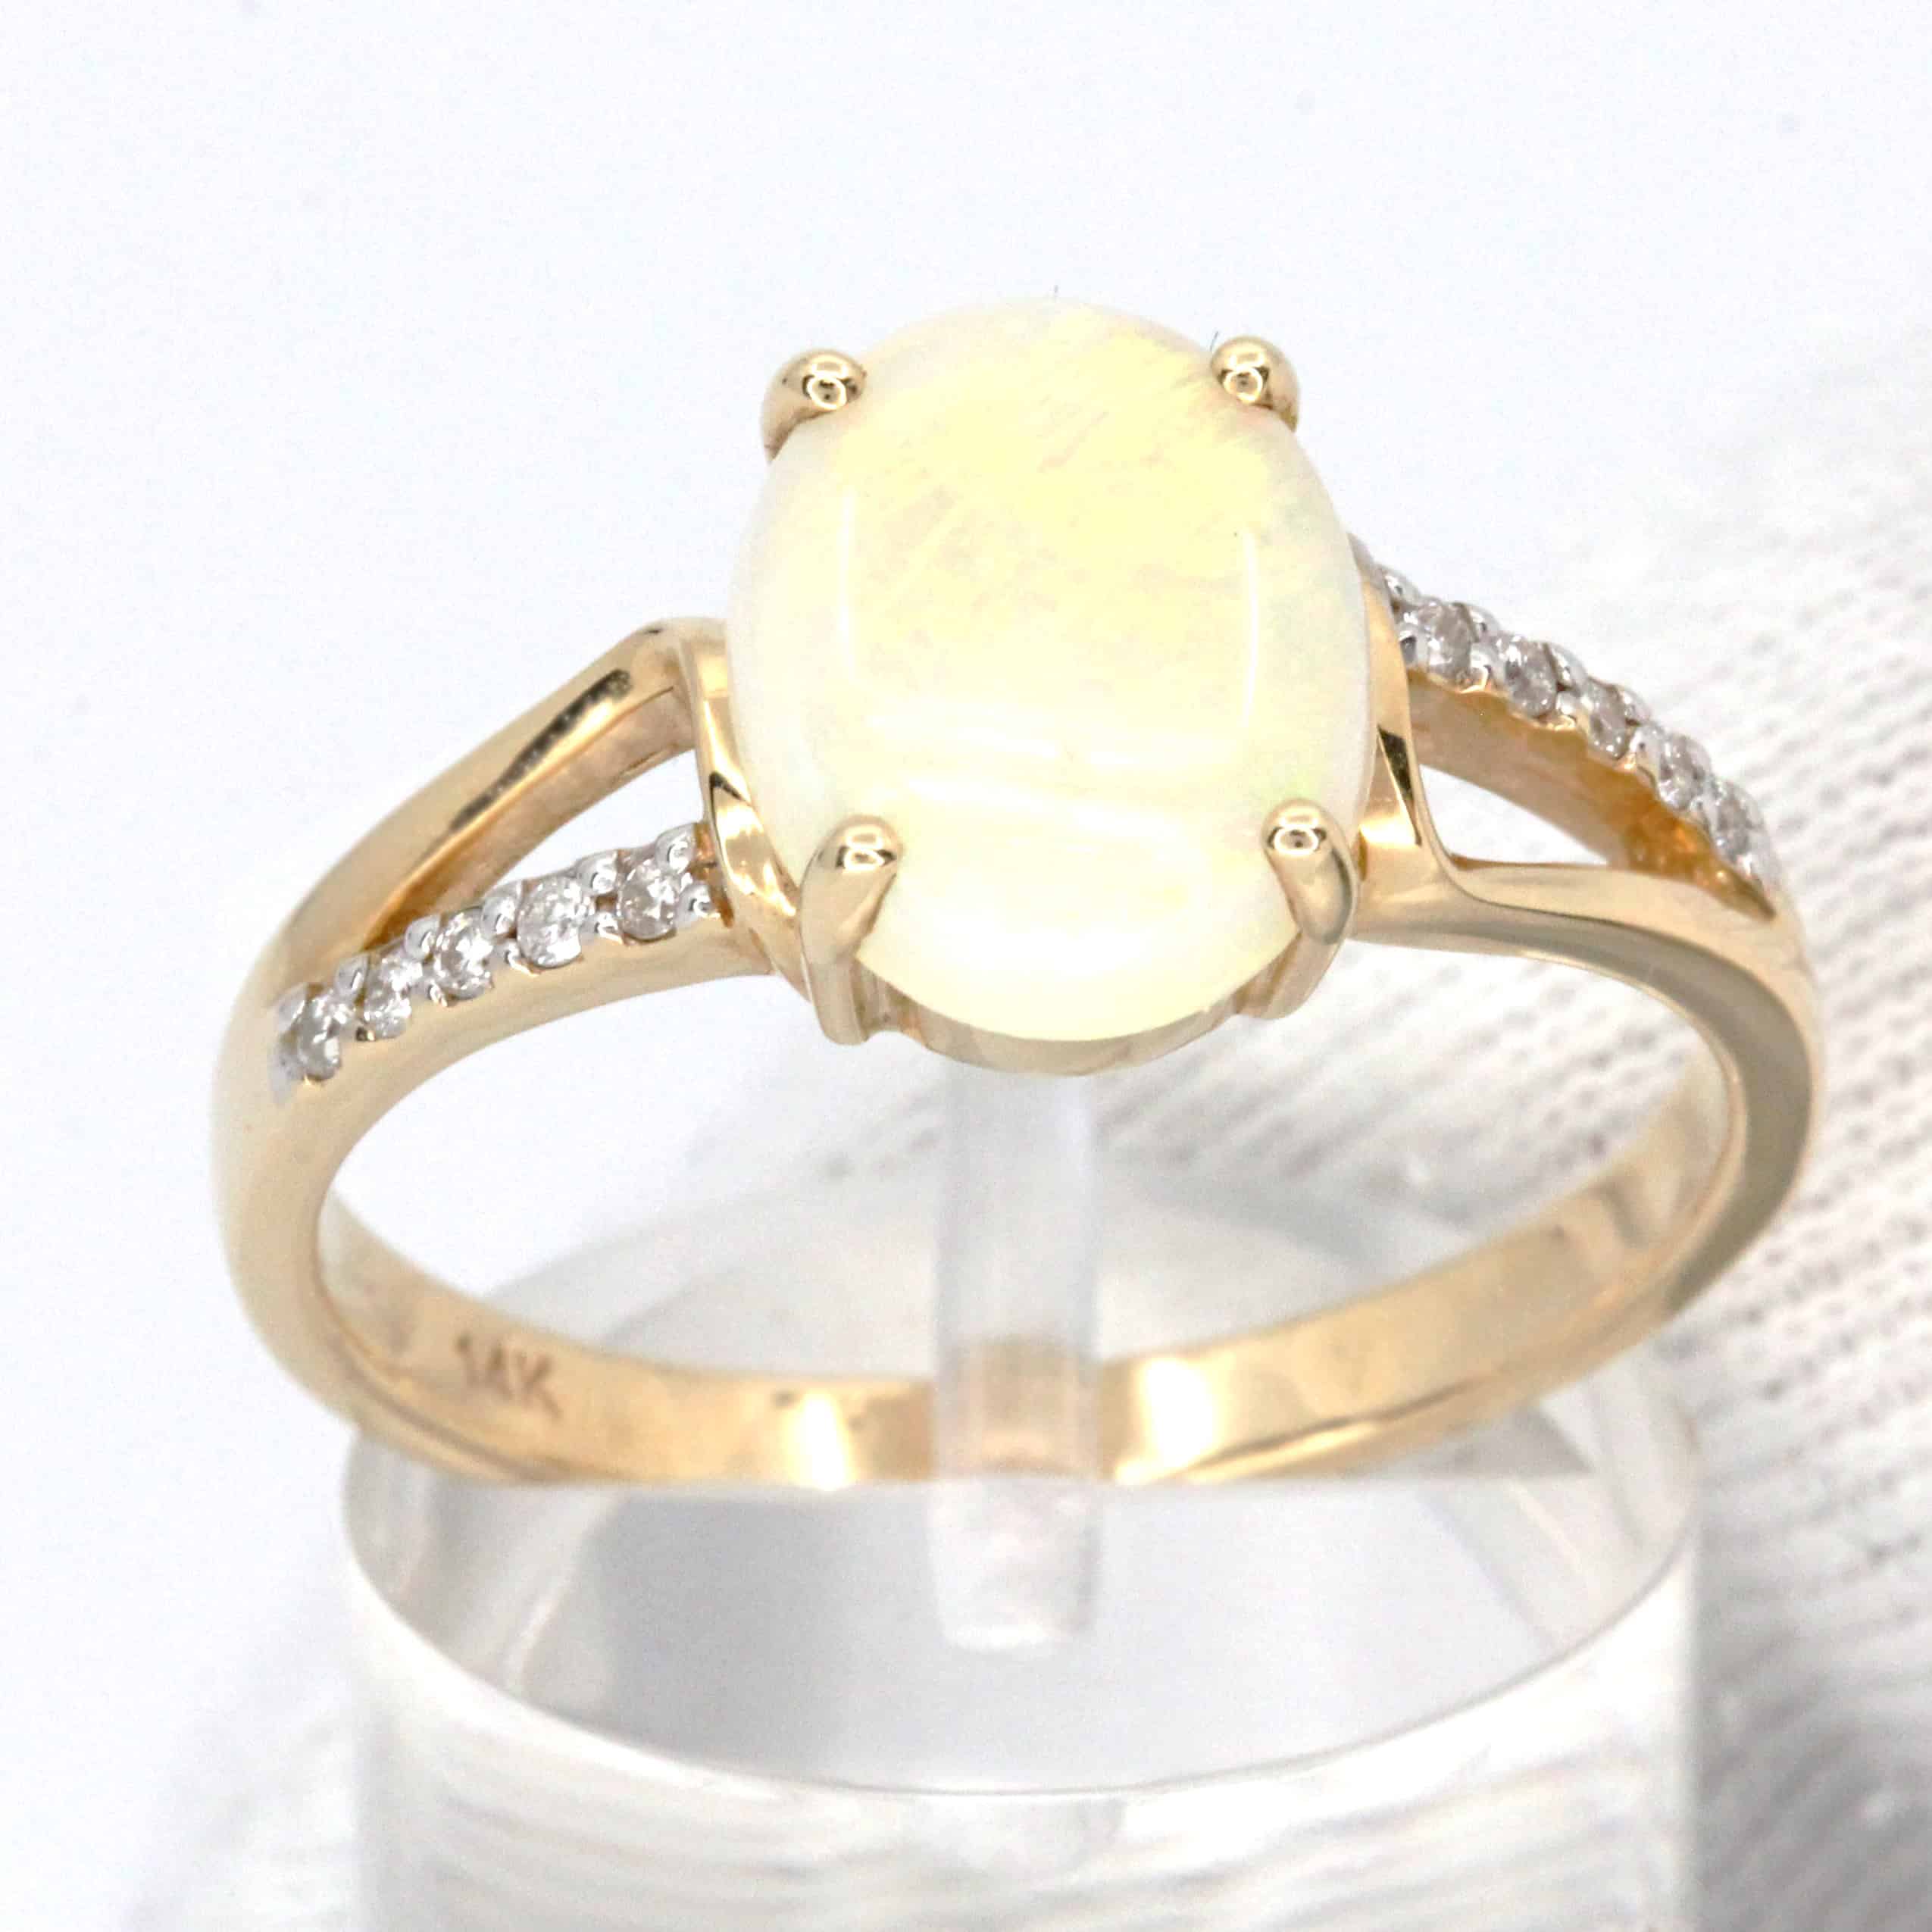 White Opal Ring with Diamond Accents Set in 14ct Yellow Gold Allgem